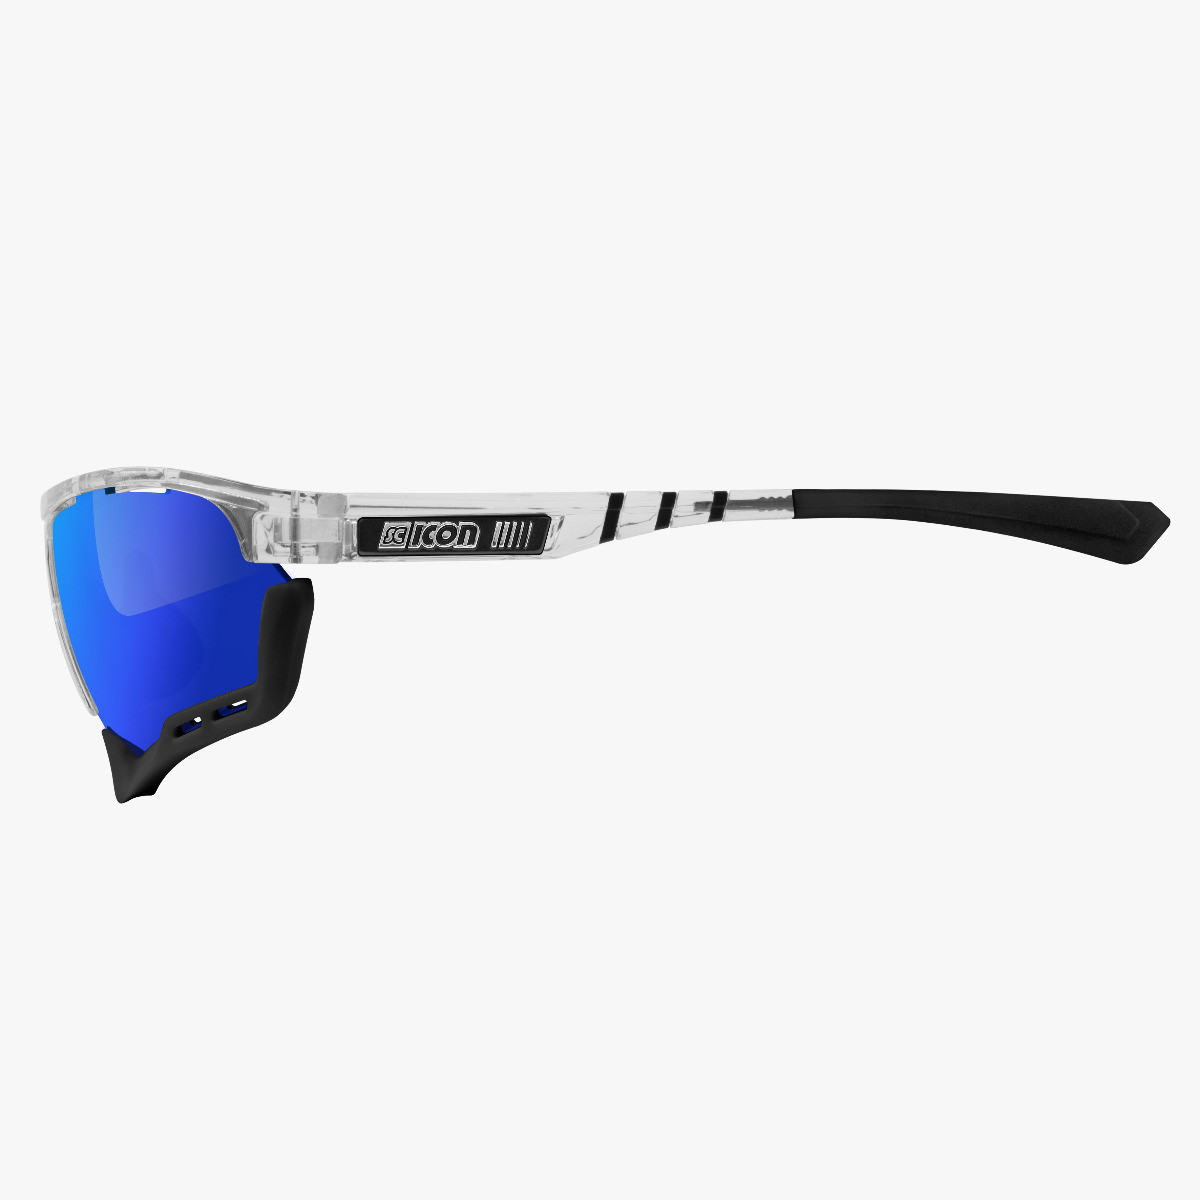 Scicon Sports | Aerocomfort Sport Cycling Performance Sunglasses - Crystal / Blue - EY15030702
